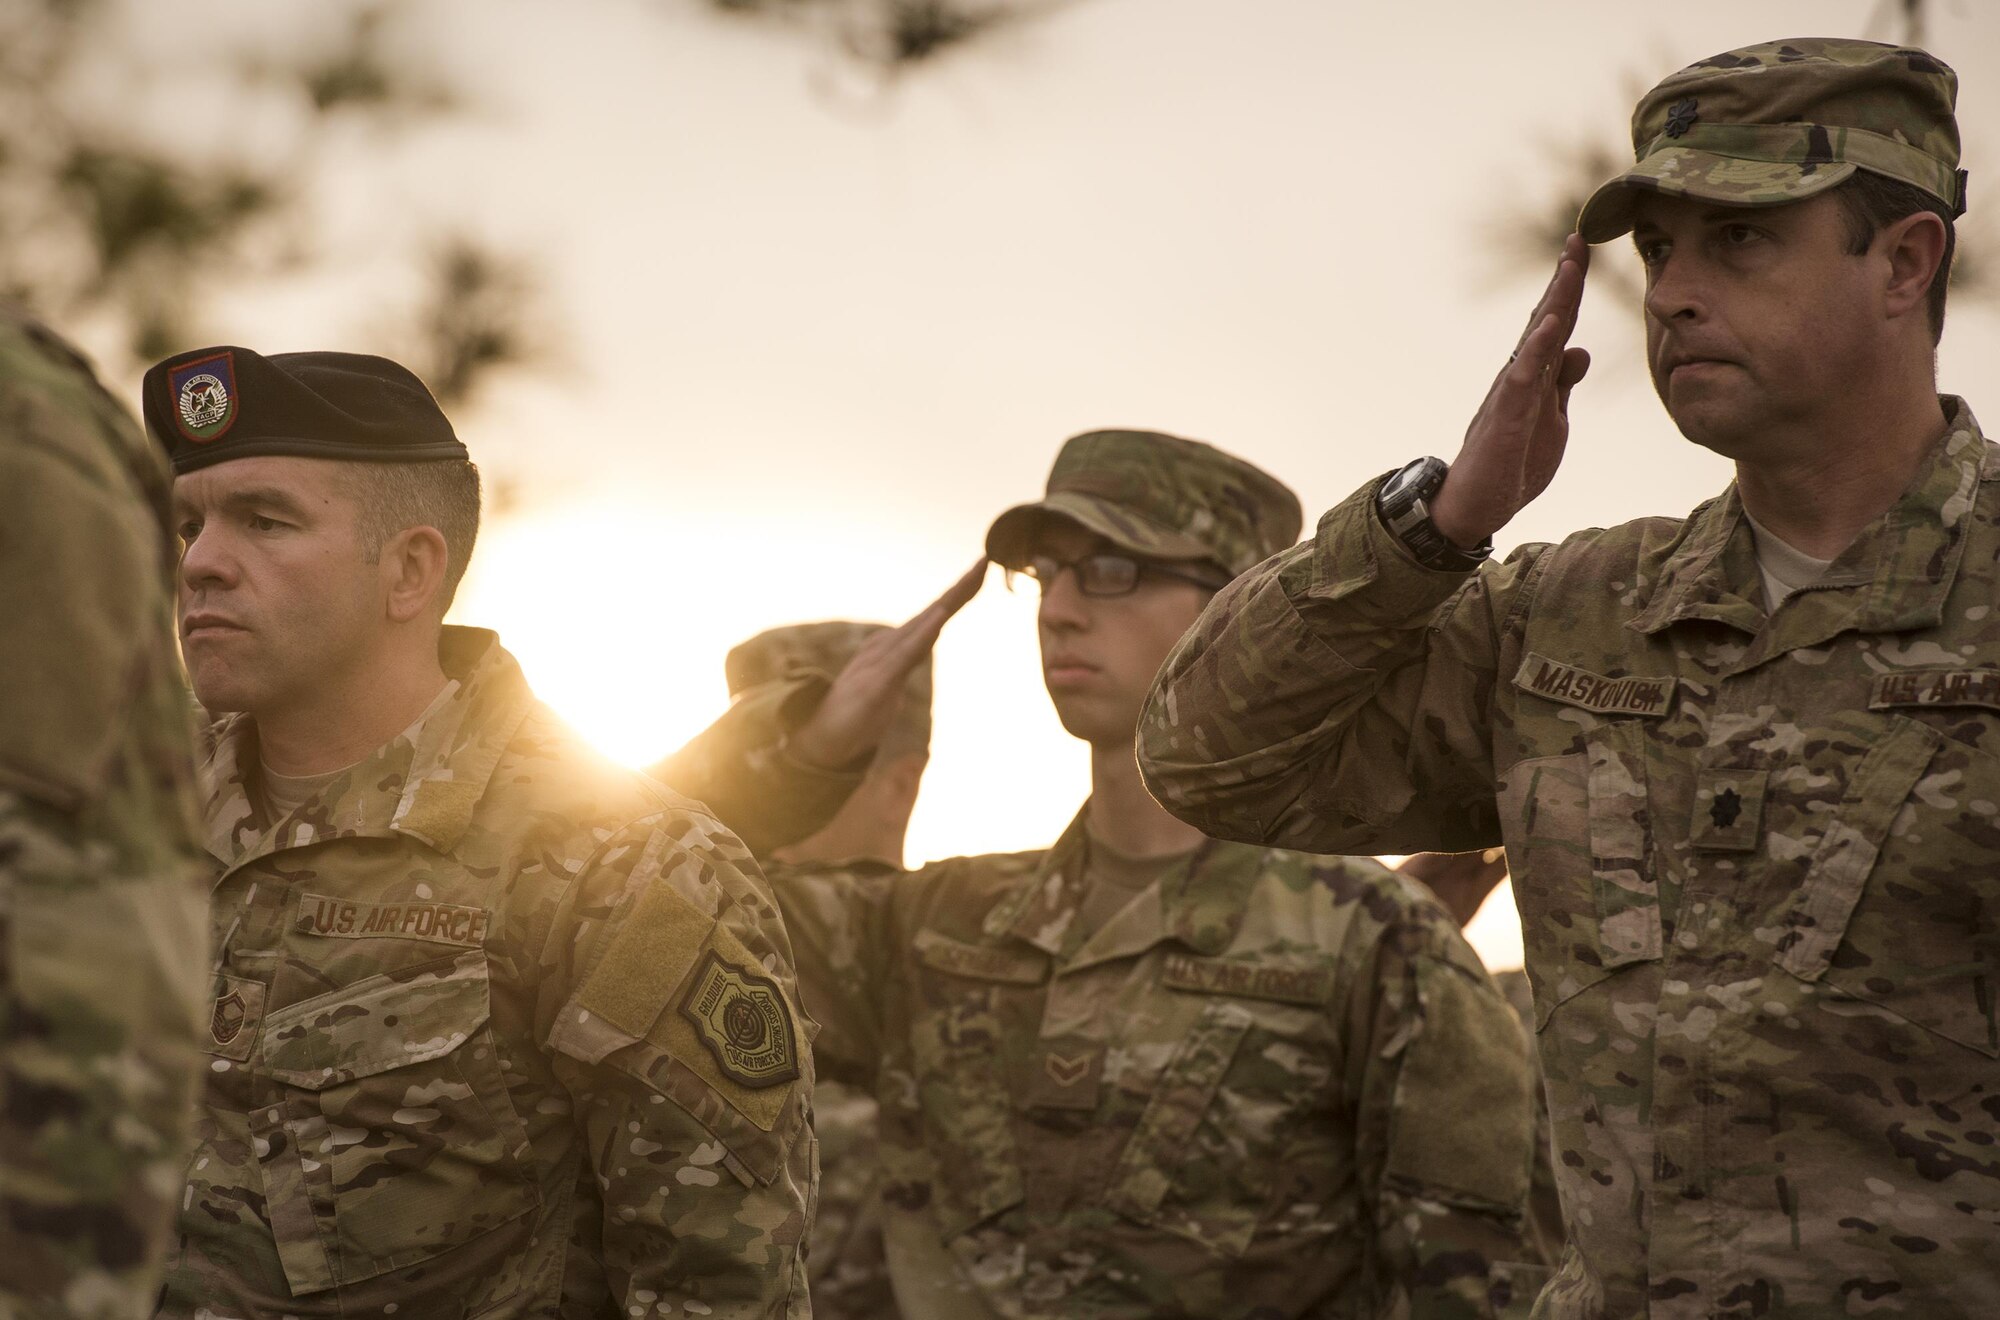 U.S. Air Force Airmen from the 93d Air Ground Operations Wing salute as taps is played, April 15, 2016, at Avon Park Air Force Range, Fla. The Airmen gathered to pay tribute to Lt. Col William Schroeder, who served alongside many members of the 93d AGOW. (U.S. Air Force Photo by Senior Airman Ryan Callaghan/Released)
